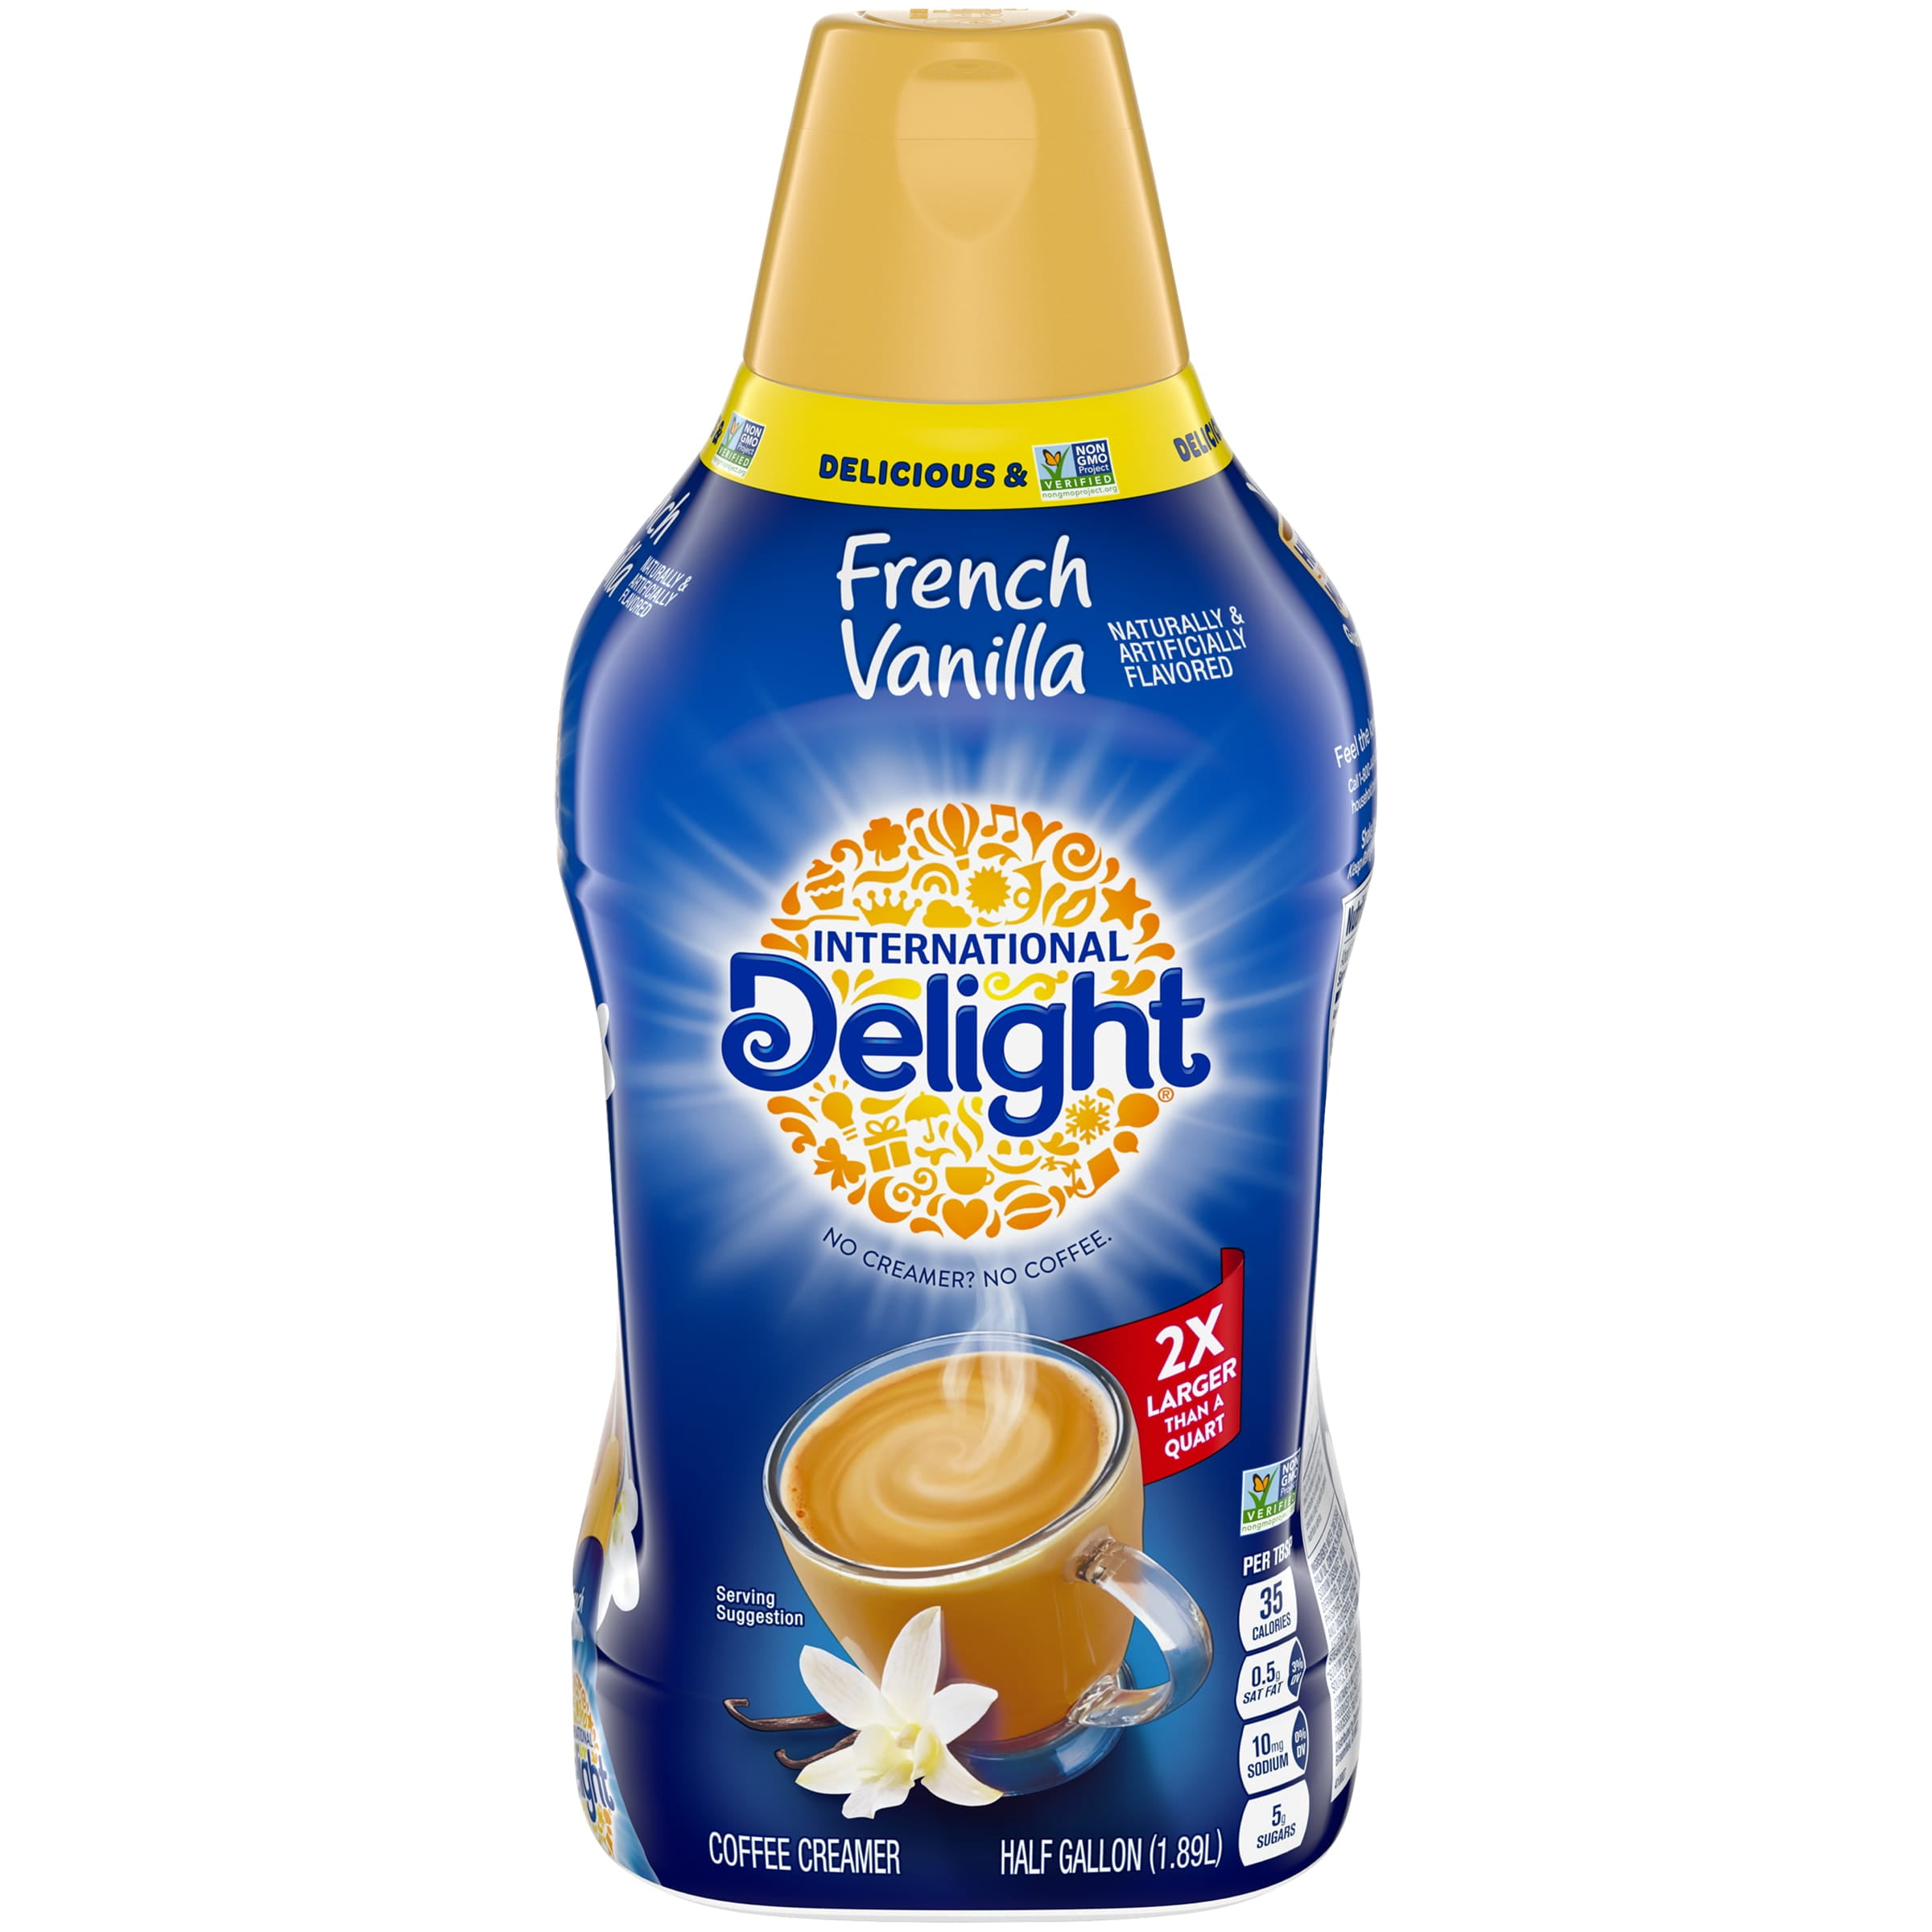 French vanilla. Coffee and Delight. International Delight. French Vanilla Coffee.